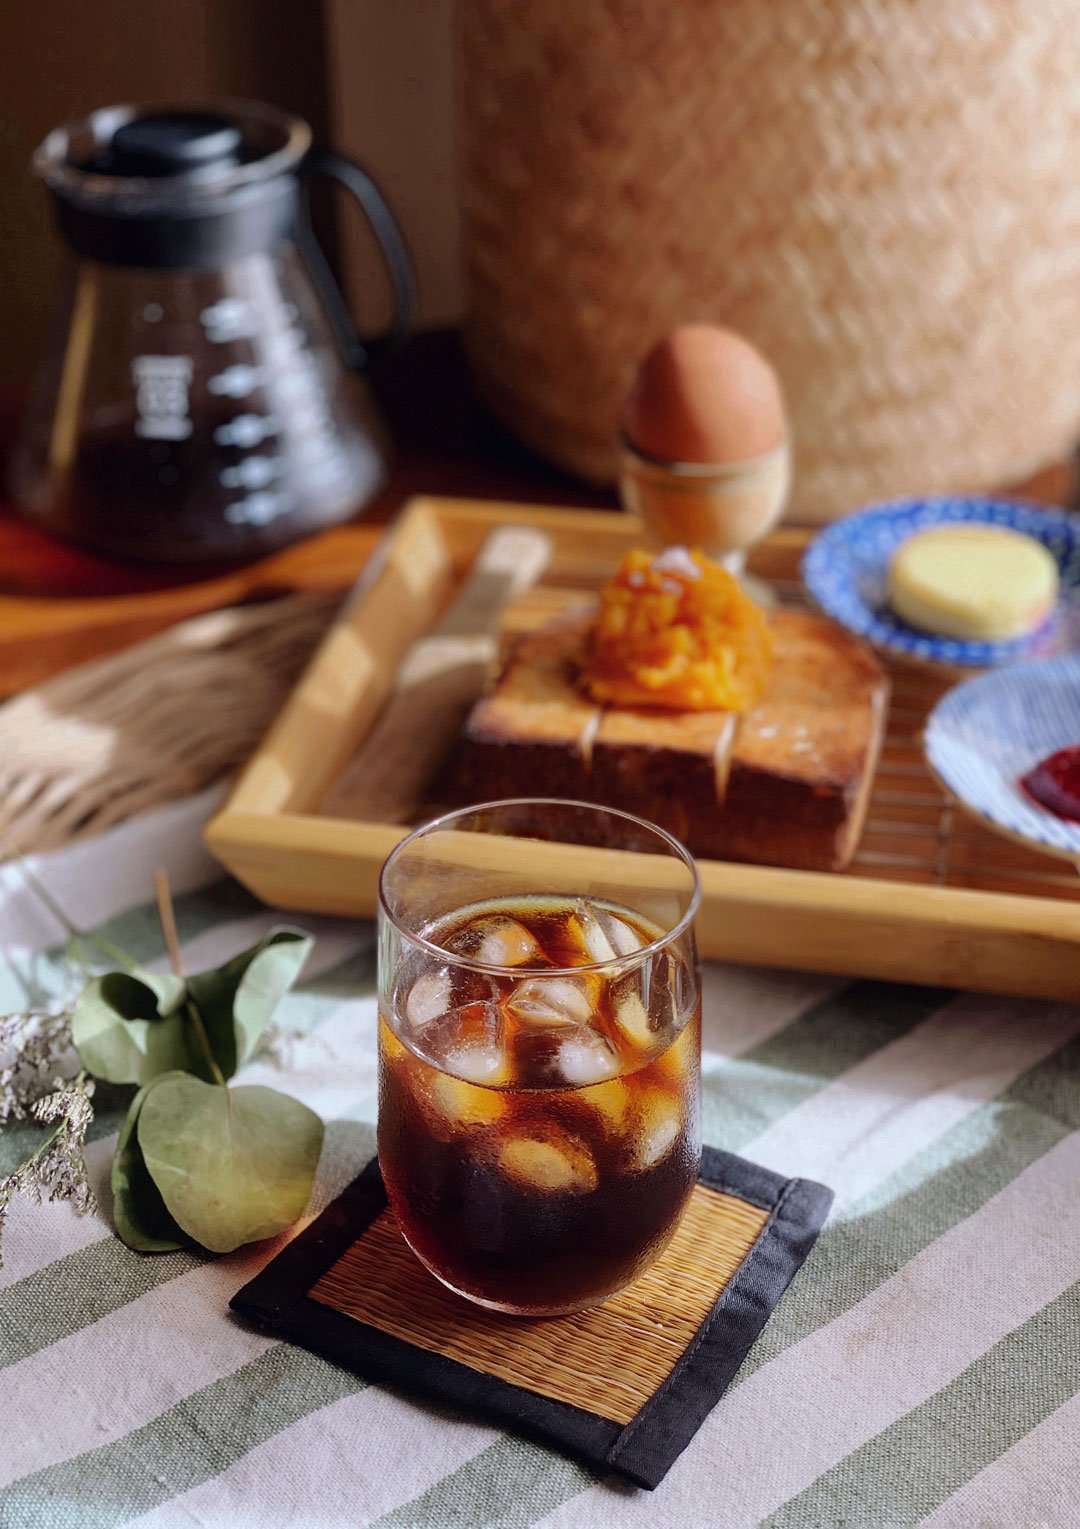 Hereâs how to make your own cold brew coffee at home